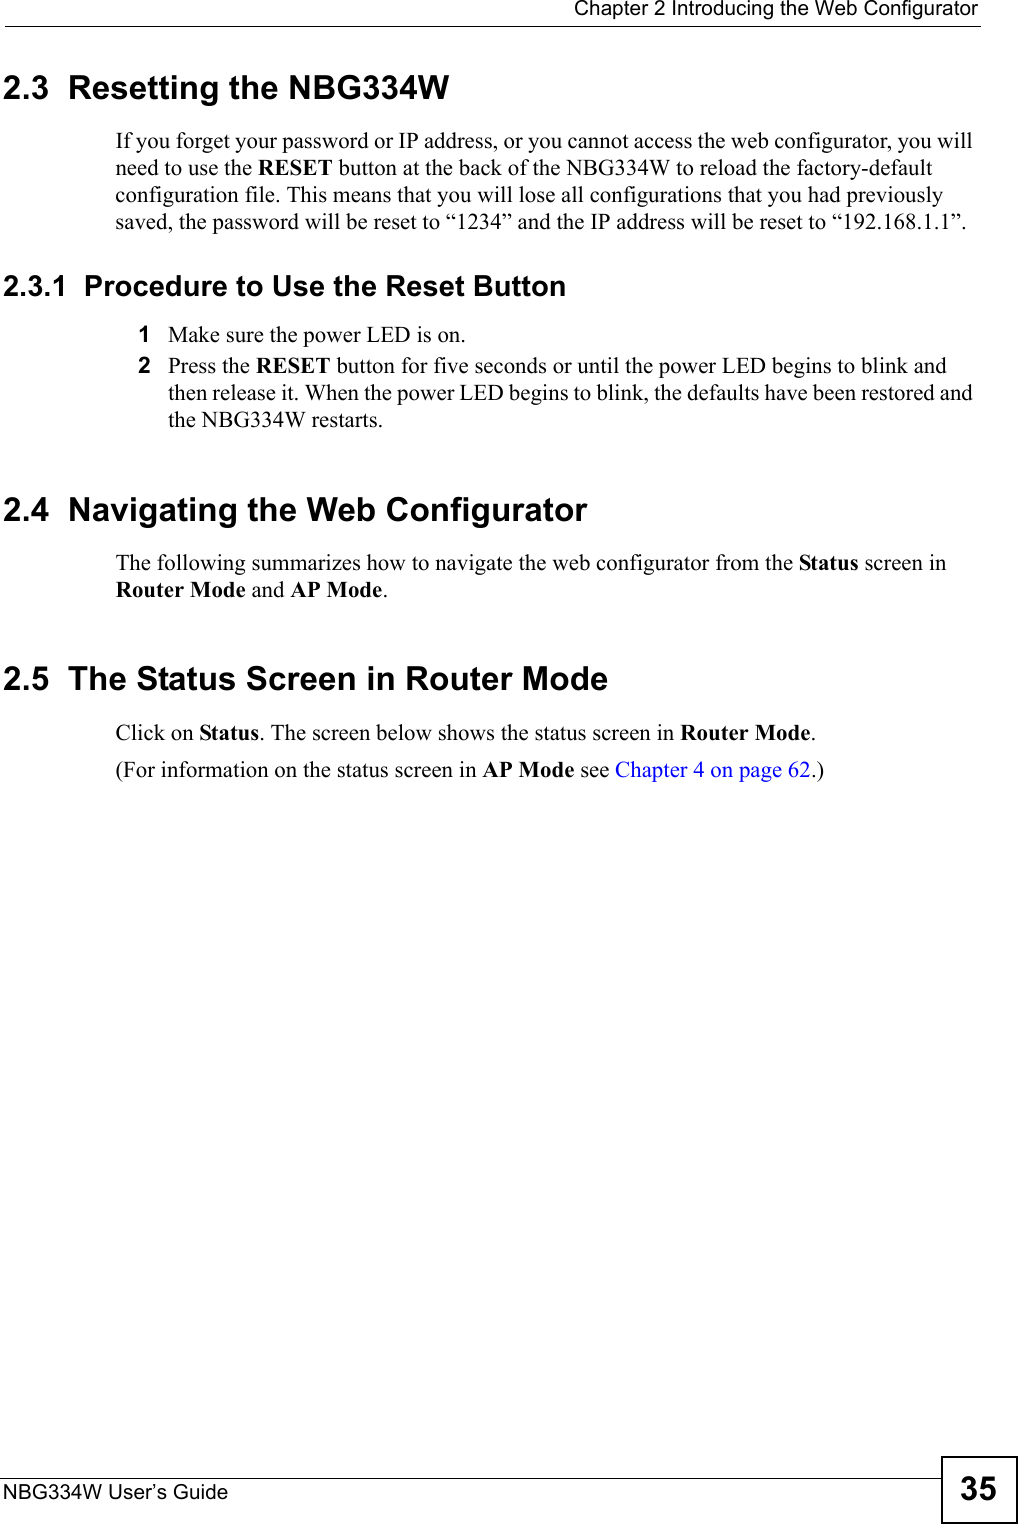  Chapter 2 Introducing the Web ConfiguratorNBG334W User’s Guide 352.3  Resetting the NBG334WIf you forget your password or IP address, or you cannot access the web configurator, you will need to use the RESET button at the back of the NBG334W to reload the factory-default configuration file. This means that you will lose all configurations that you had previously saved, the password will be reset to “1234” and the IP address will be reset to “192.168.1.1”.2.3.1  Procedure to Use the Reset Button1Make sure the power LED is on.2Press the RESET button for five seconds or until the power LED begins to blink and then release it. When the power LED begins to blink, the defaults have been restored and the NBG334W restarts.2.4  Navigating the Web Configurator    The following summarizes how to navigate the web configurator from the Status screen in Router Mode and AP Mode. 2.5  The Status Screen in Router ModeClick on Status. The screen below shows the status screen in Router Mode. (For information on the status screen in AP Mode see Chapter 4 on page 62.)